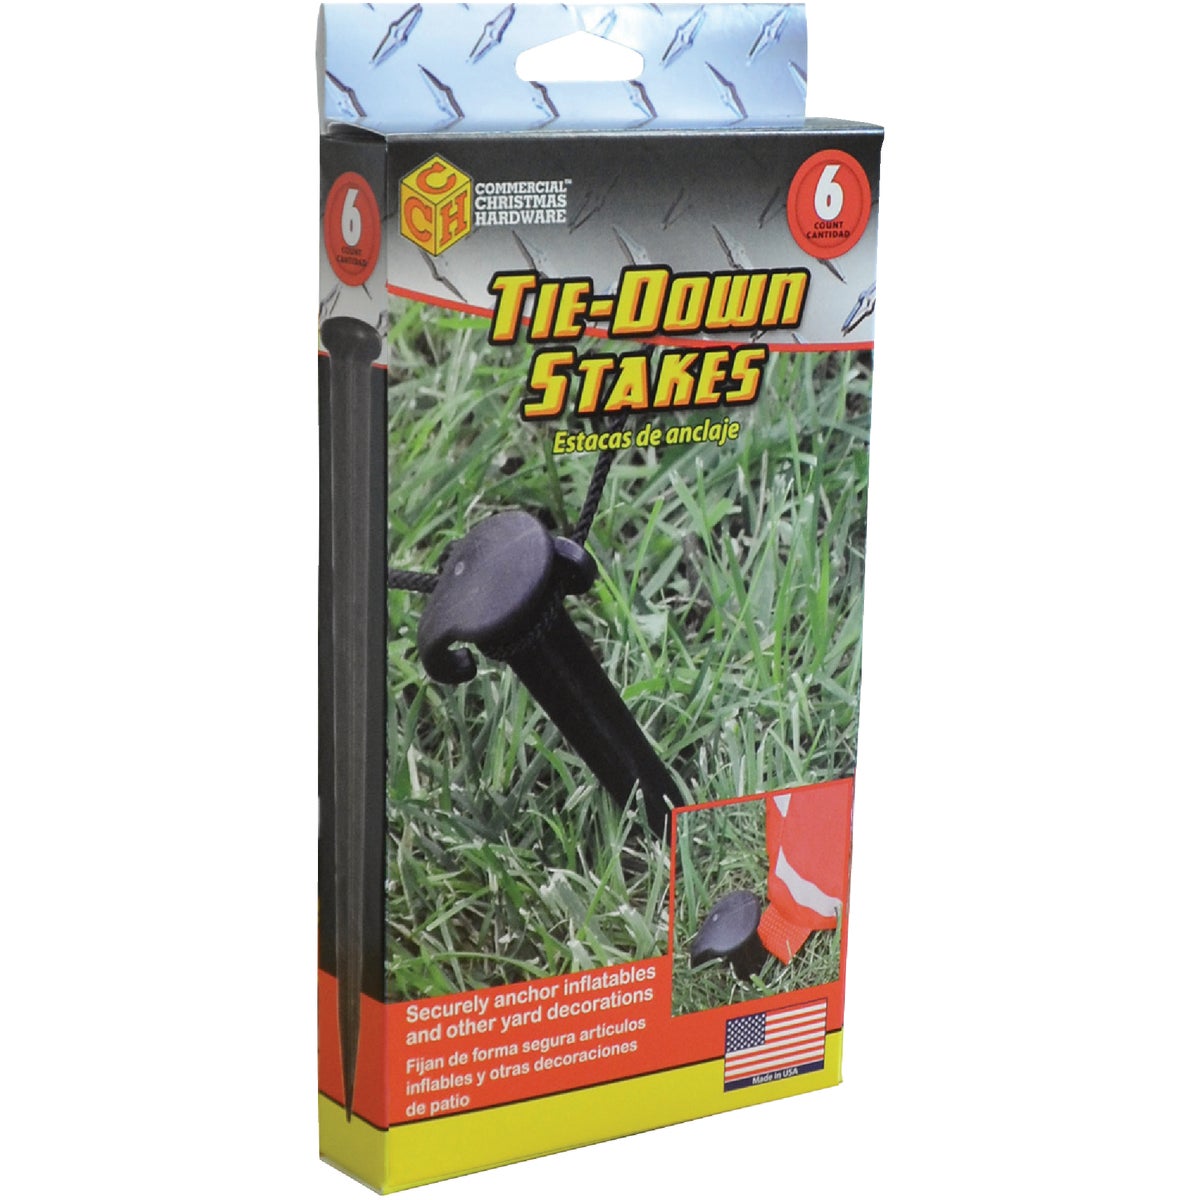 Commercial Christmas Hardware 7 In. Plastic Tie Down Stakes (6-Pack)